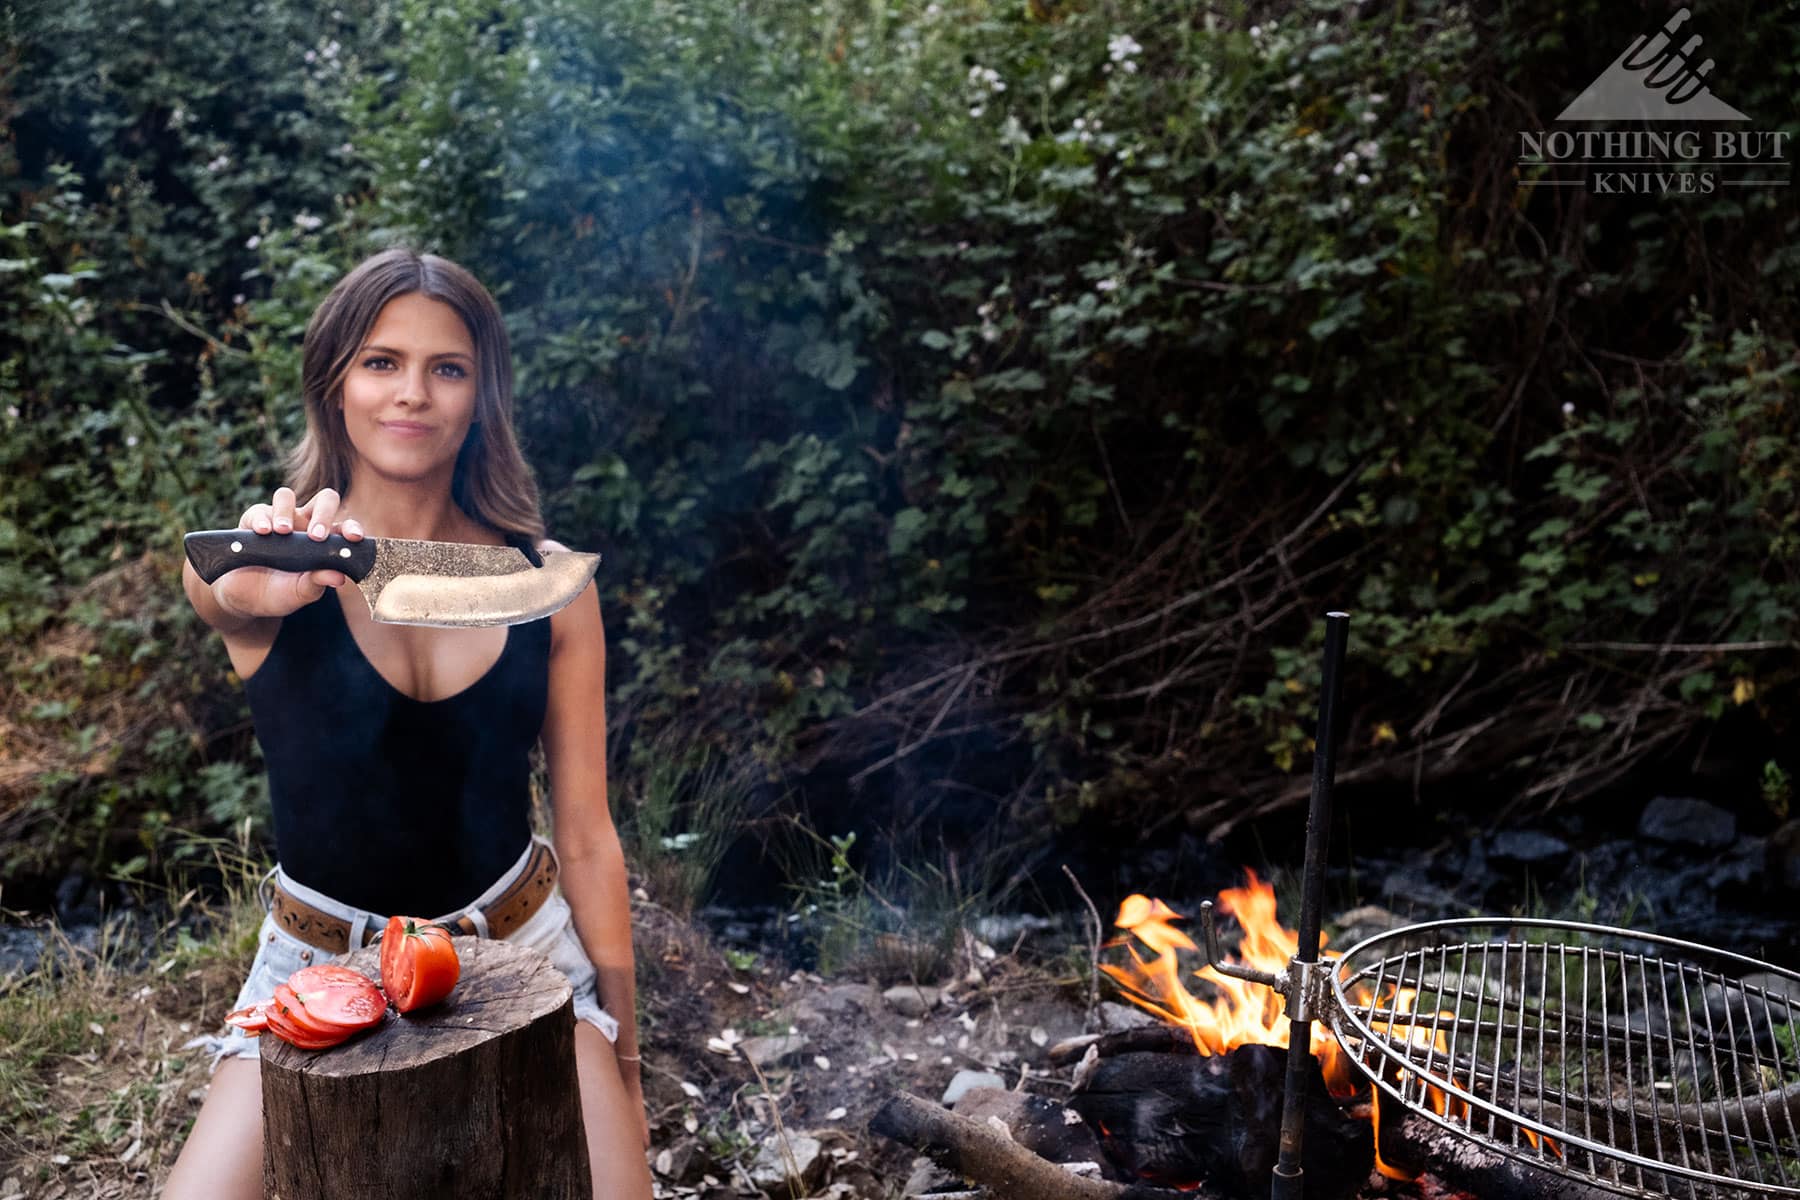 We tested over twenty camp cooking knives and picked the top performing knives for this article. One of our reviewers can be seen here holding the Condor Bush Slicer.